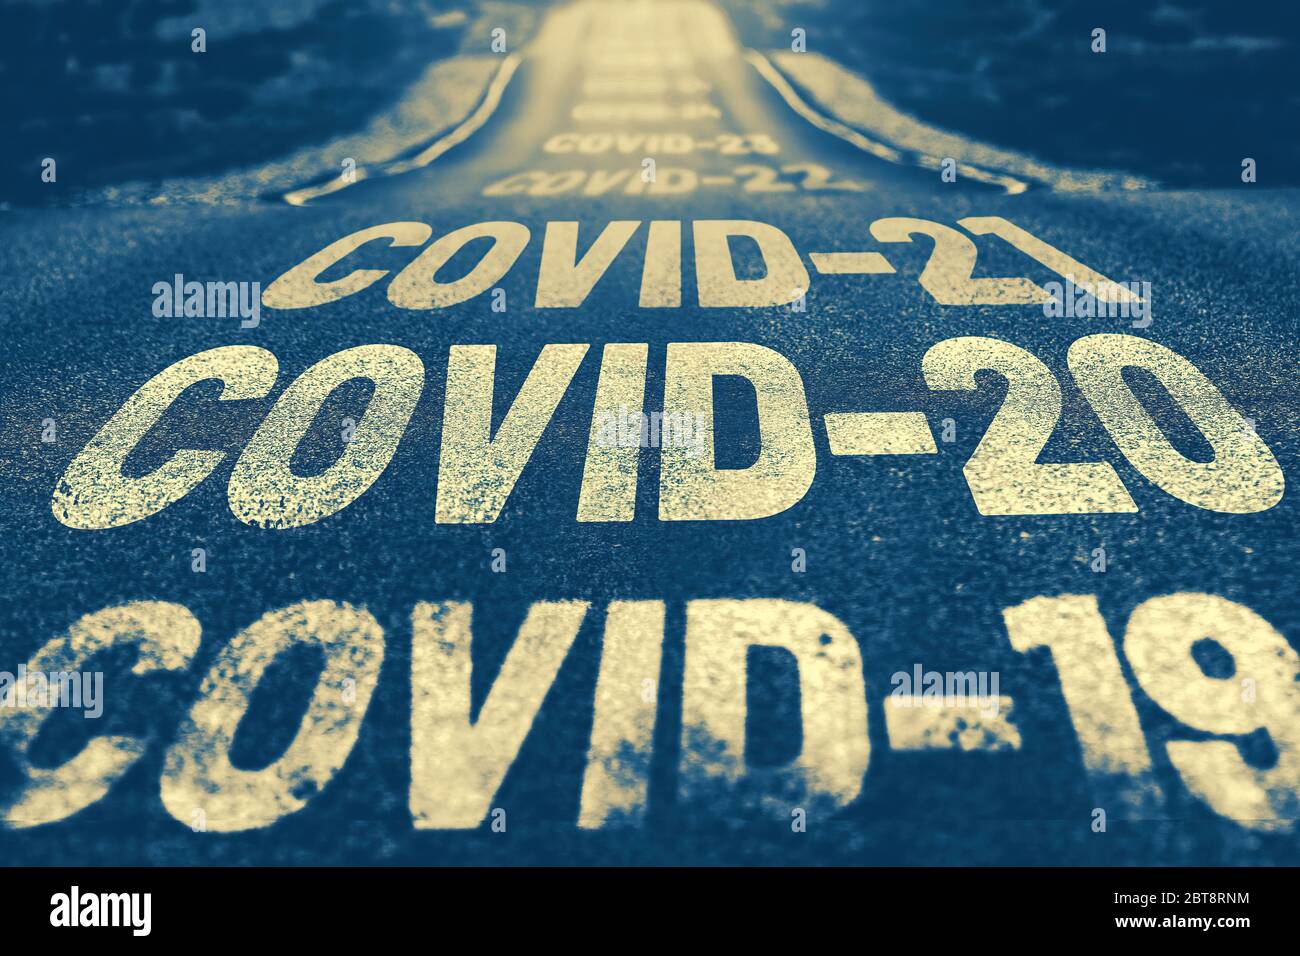 Deserted highway with the text COVID-19, COVID-20, COVID-21 and so on. The concept of new world pandemics. Blue background Stock Photo